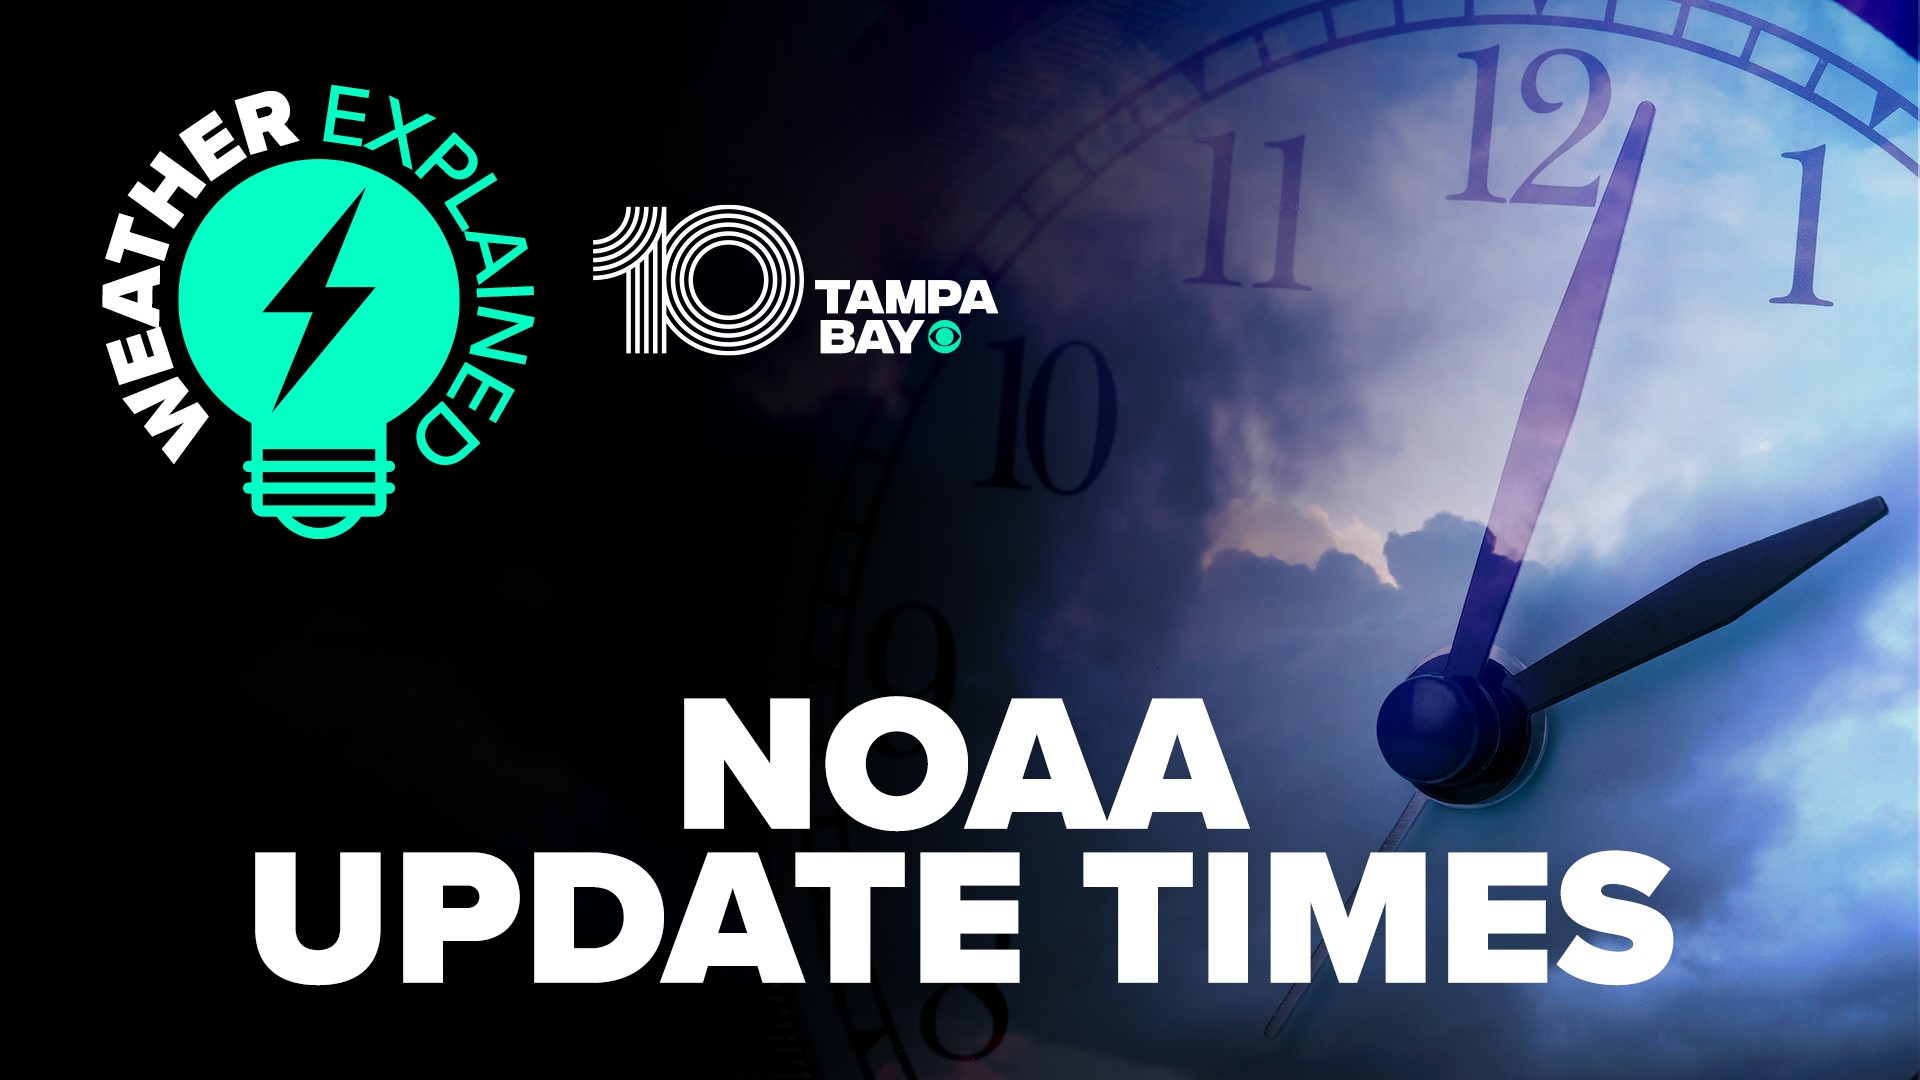 The National Hurricane Center advisories come on a predictable schedule. Meteorologist Grant Gilmore explains when.